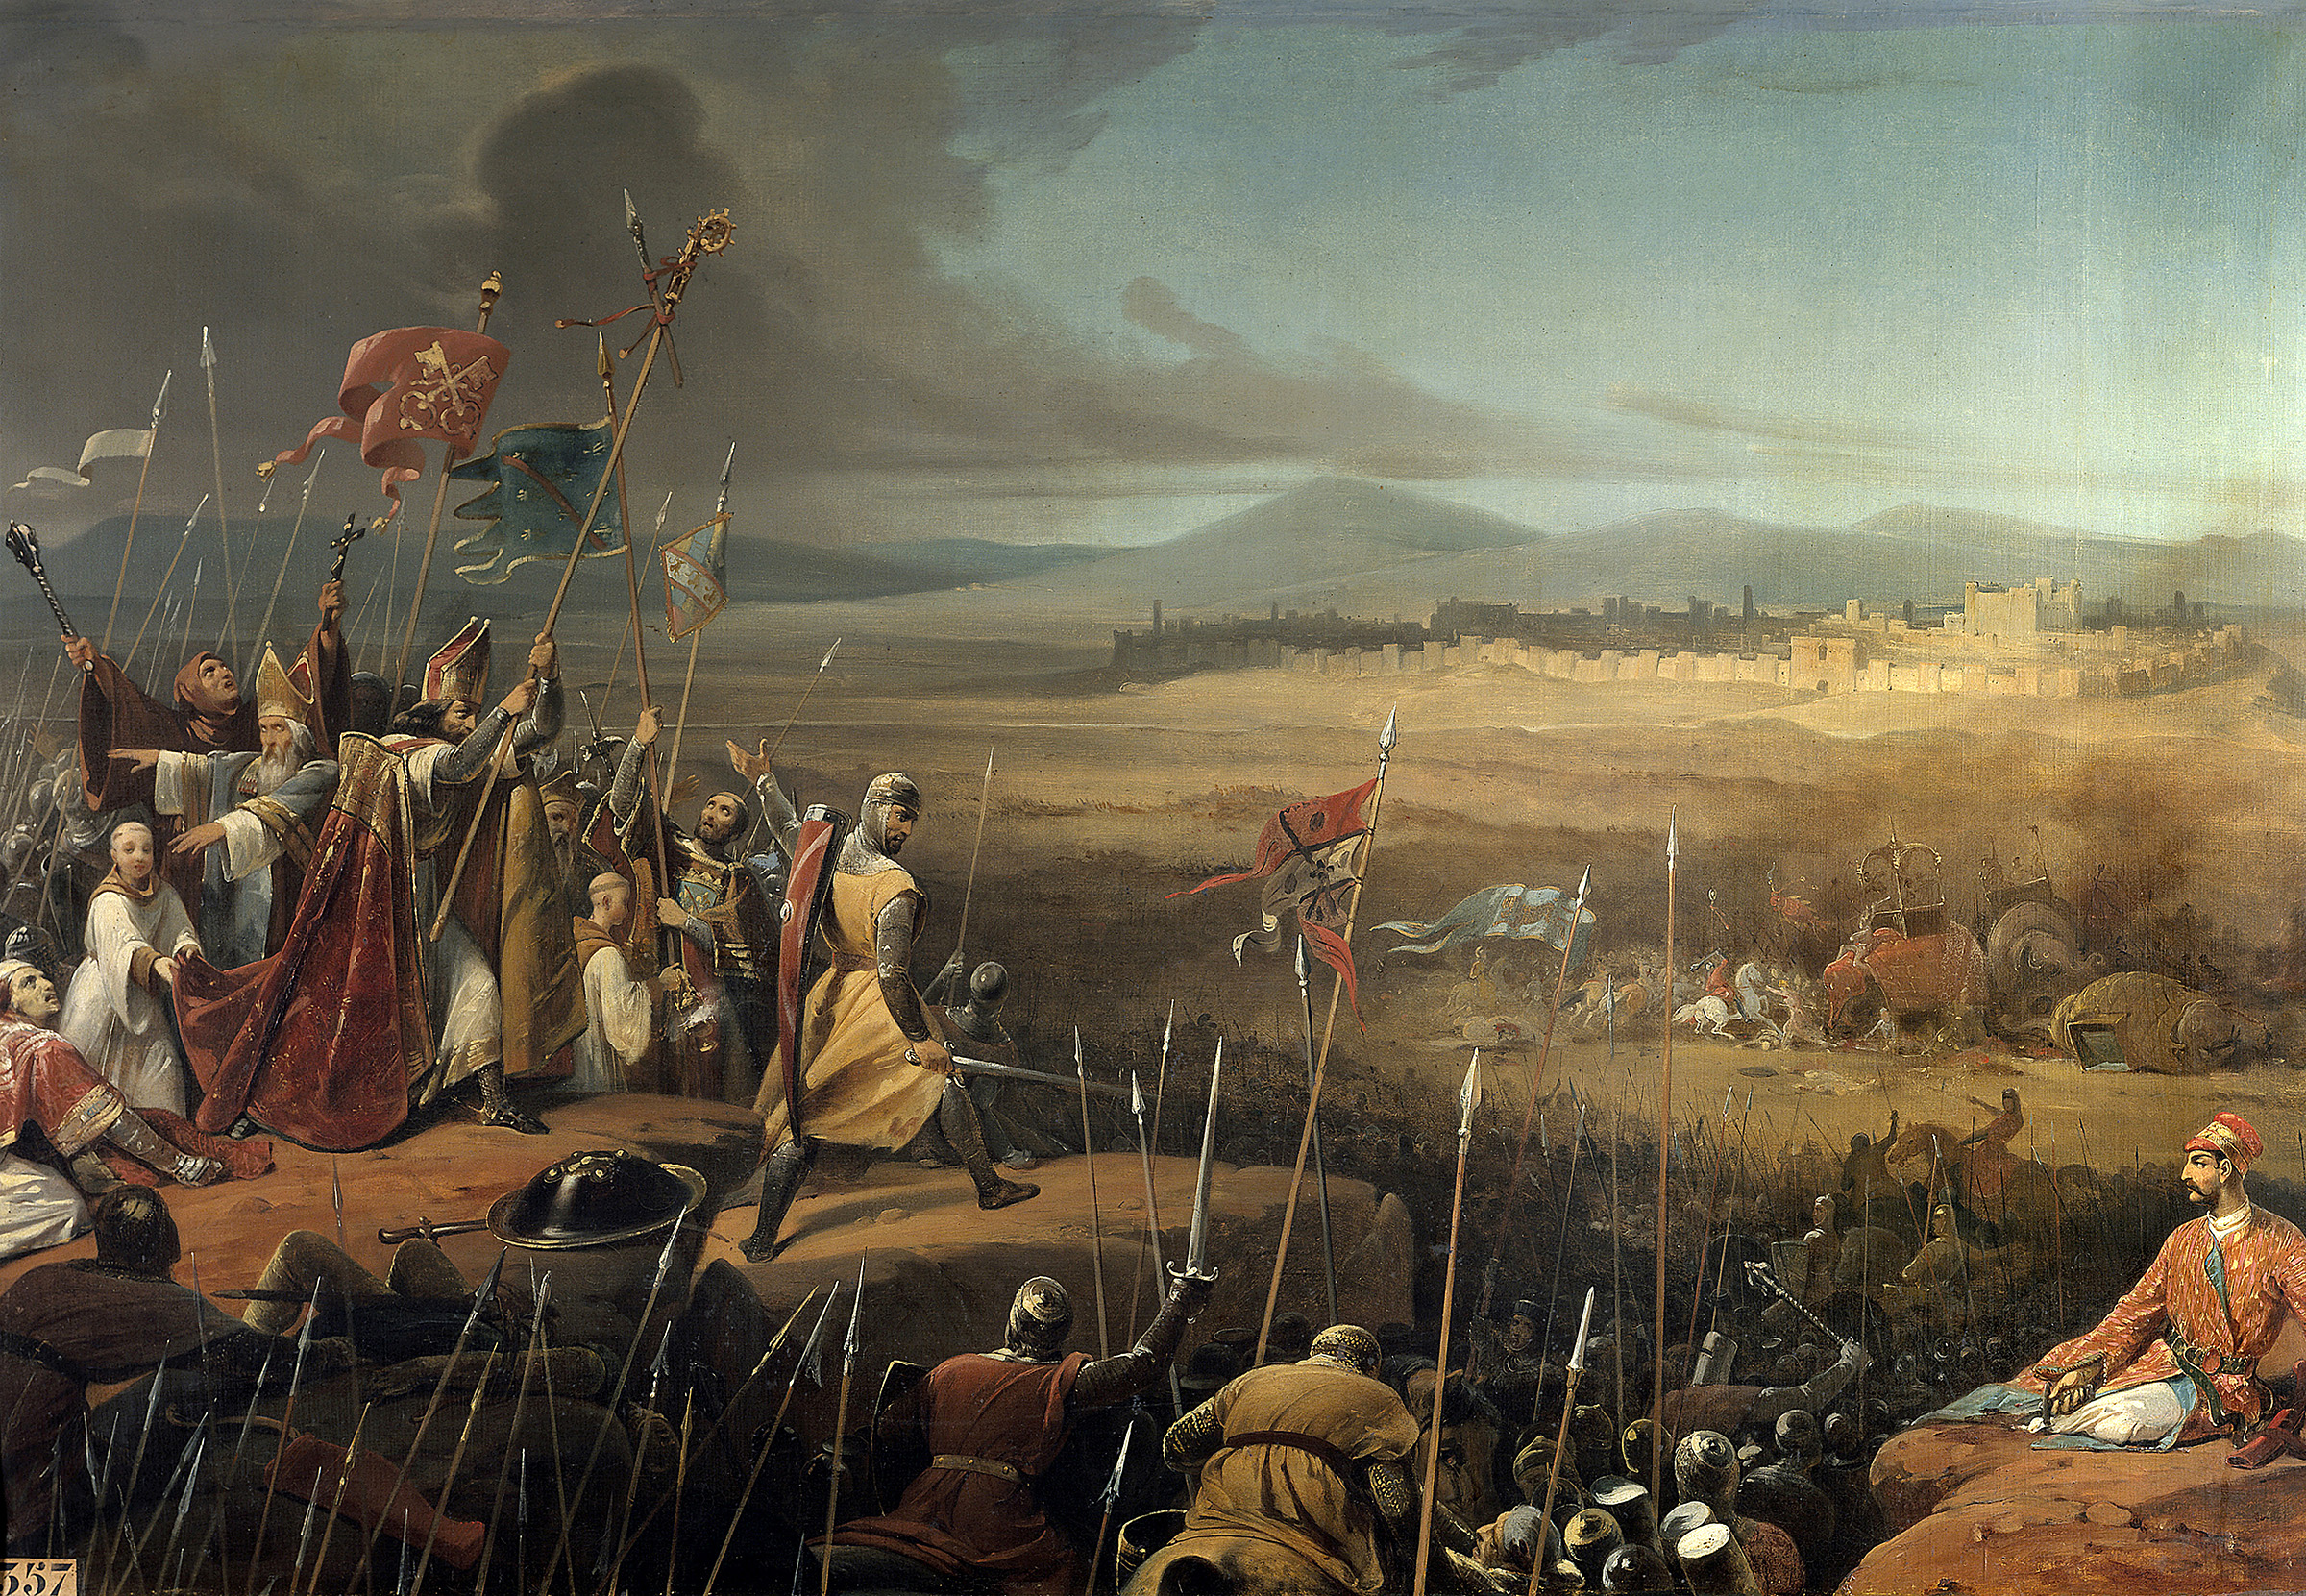 Painting by Frederic Schopin (1804-1880) depicting the First Crusade — 